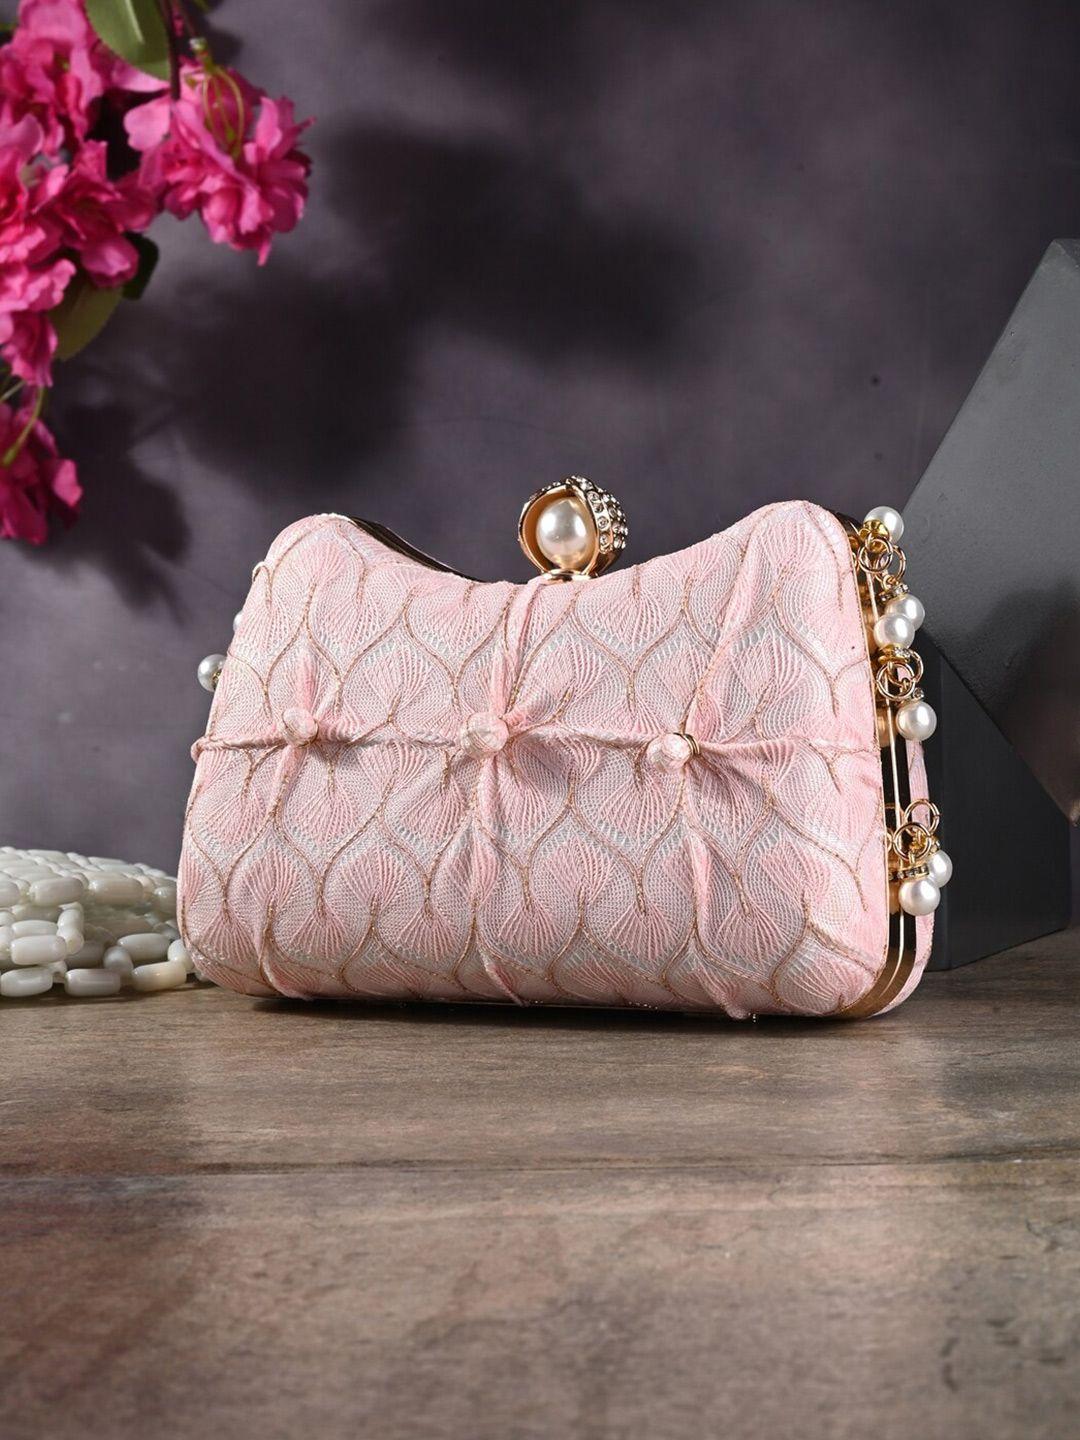 toobacraft-pink-&-gold-toned-embellished-box-clutch